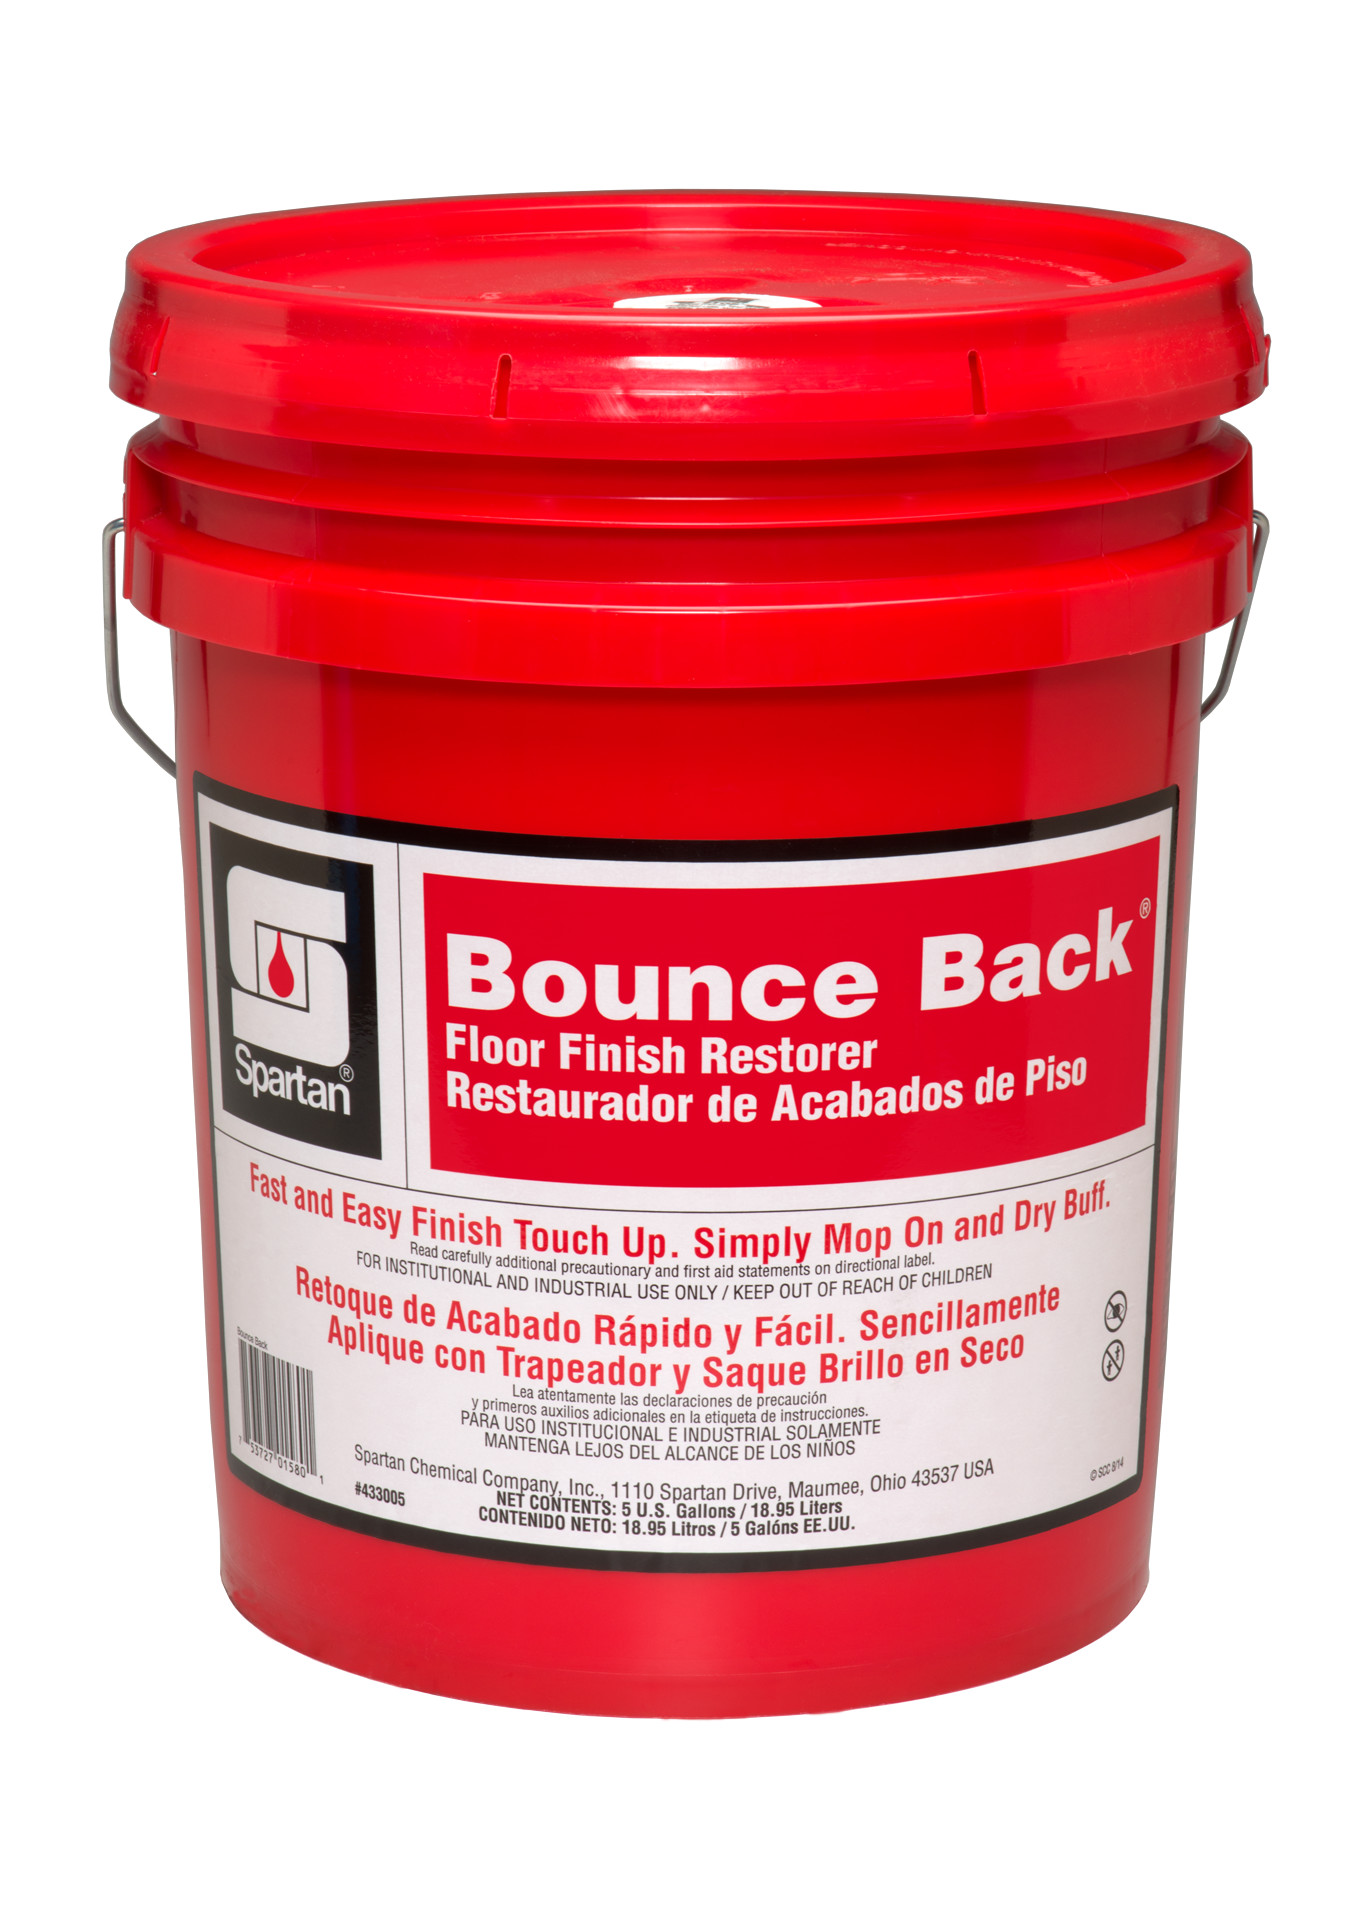 Spartan Chemical Company Bounce Back, 5 GAL PAIL